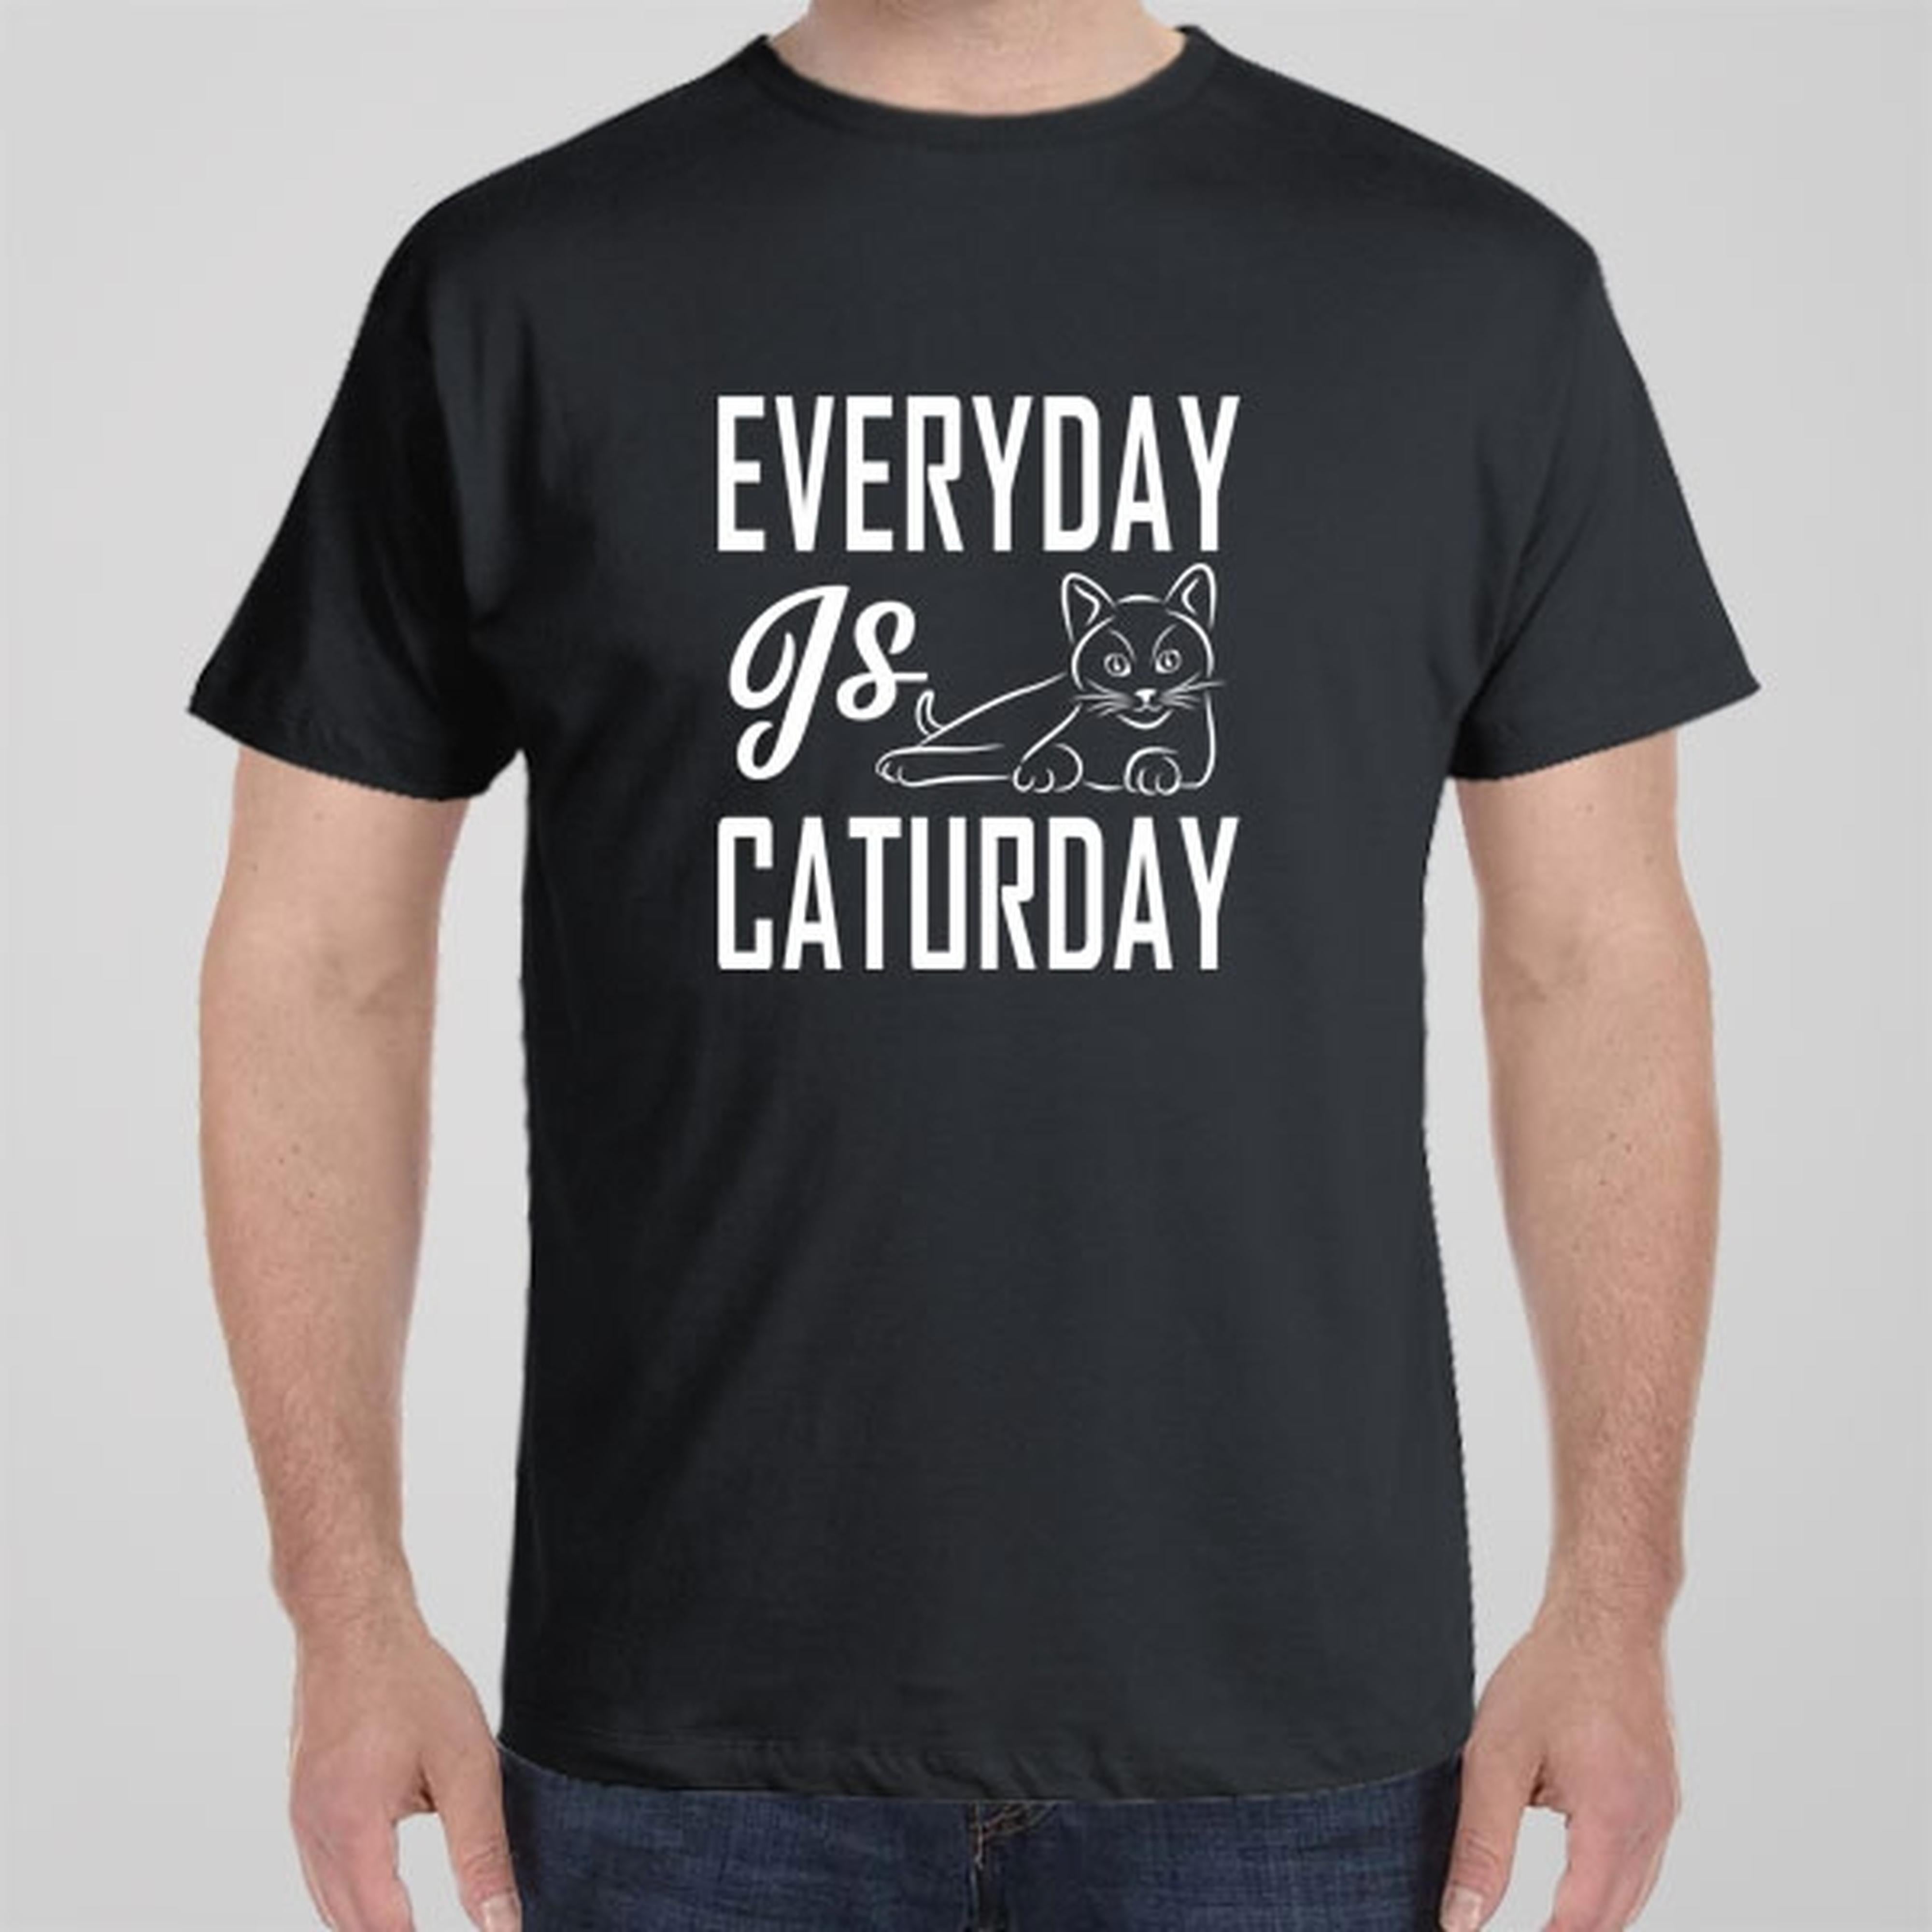 everyday-is-caturday-t-shirt